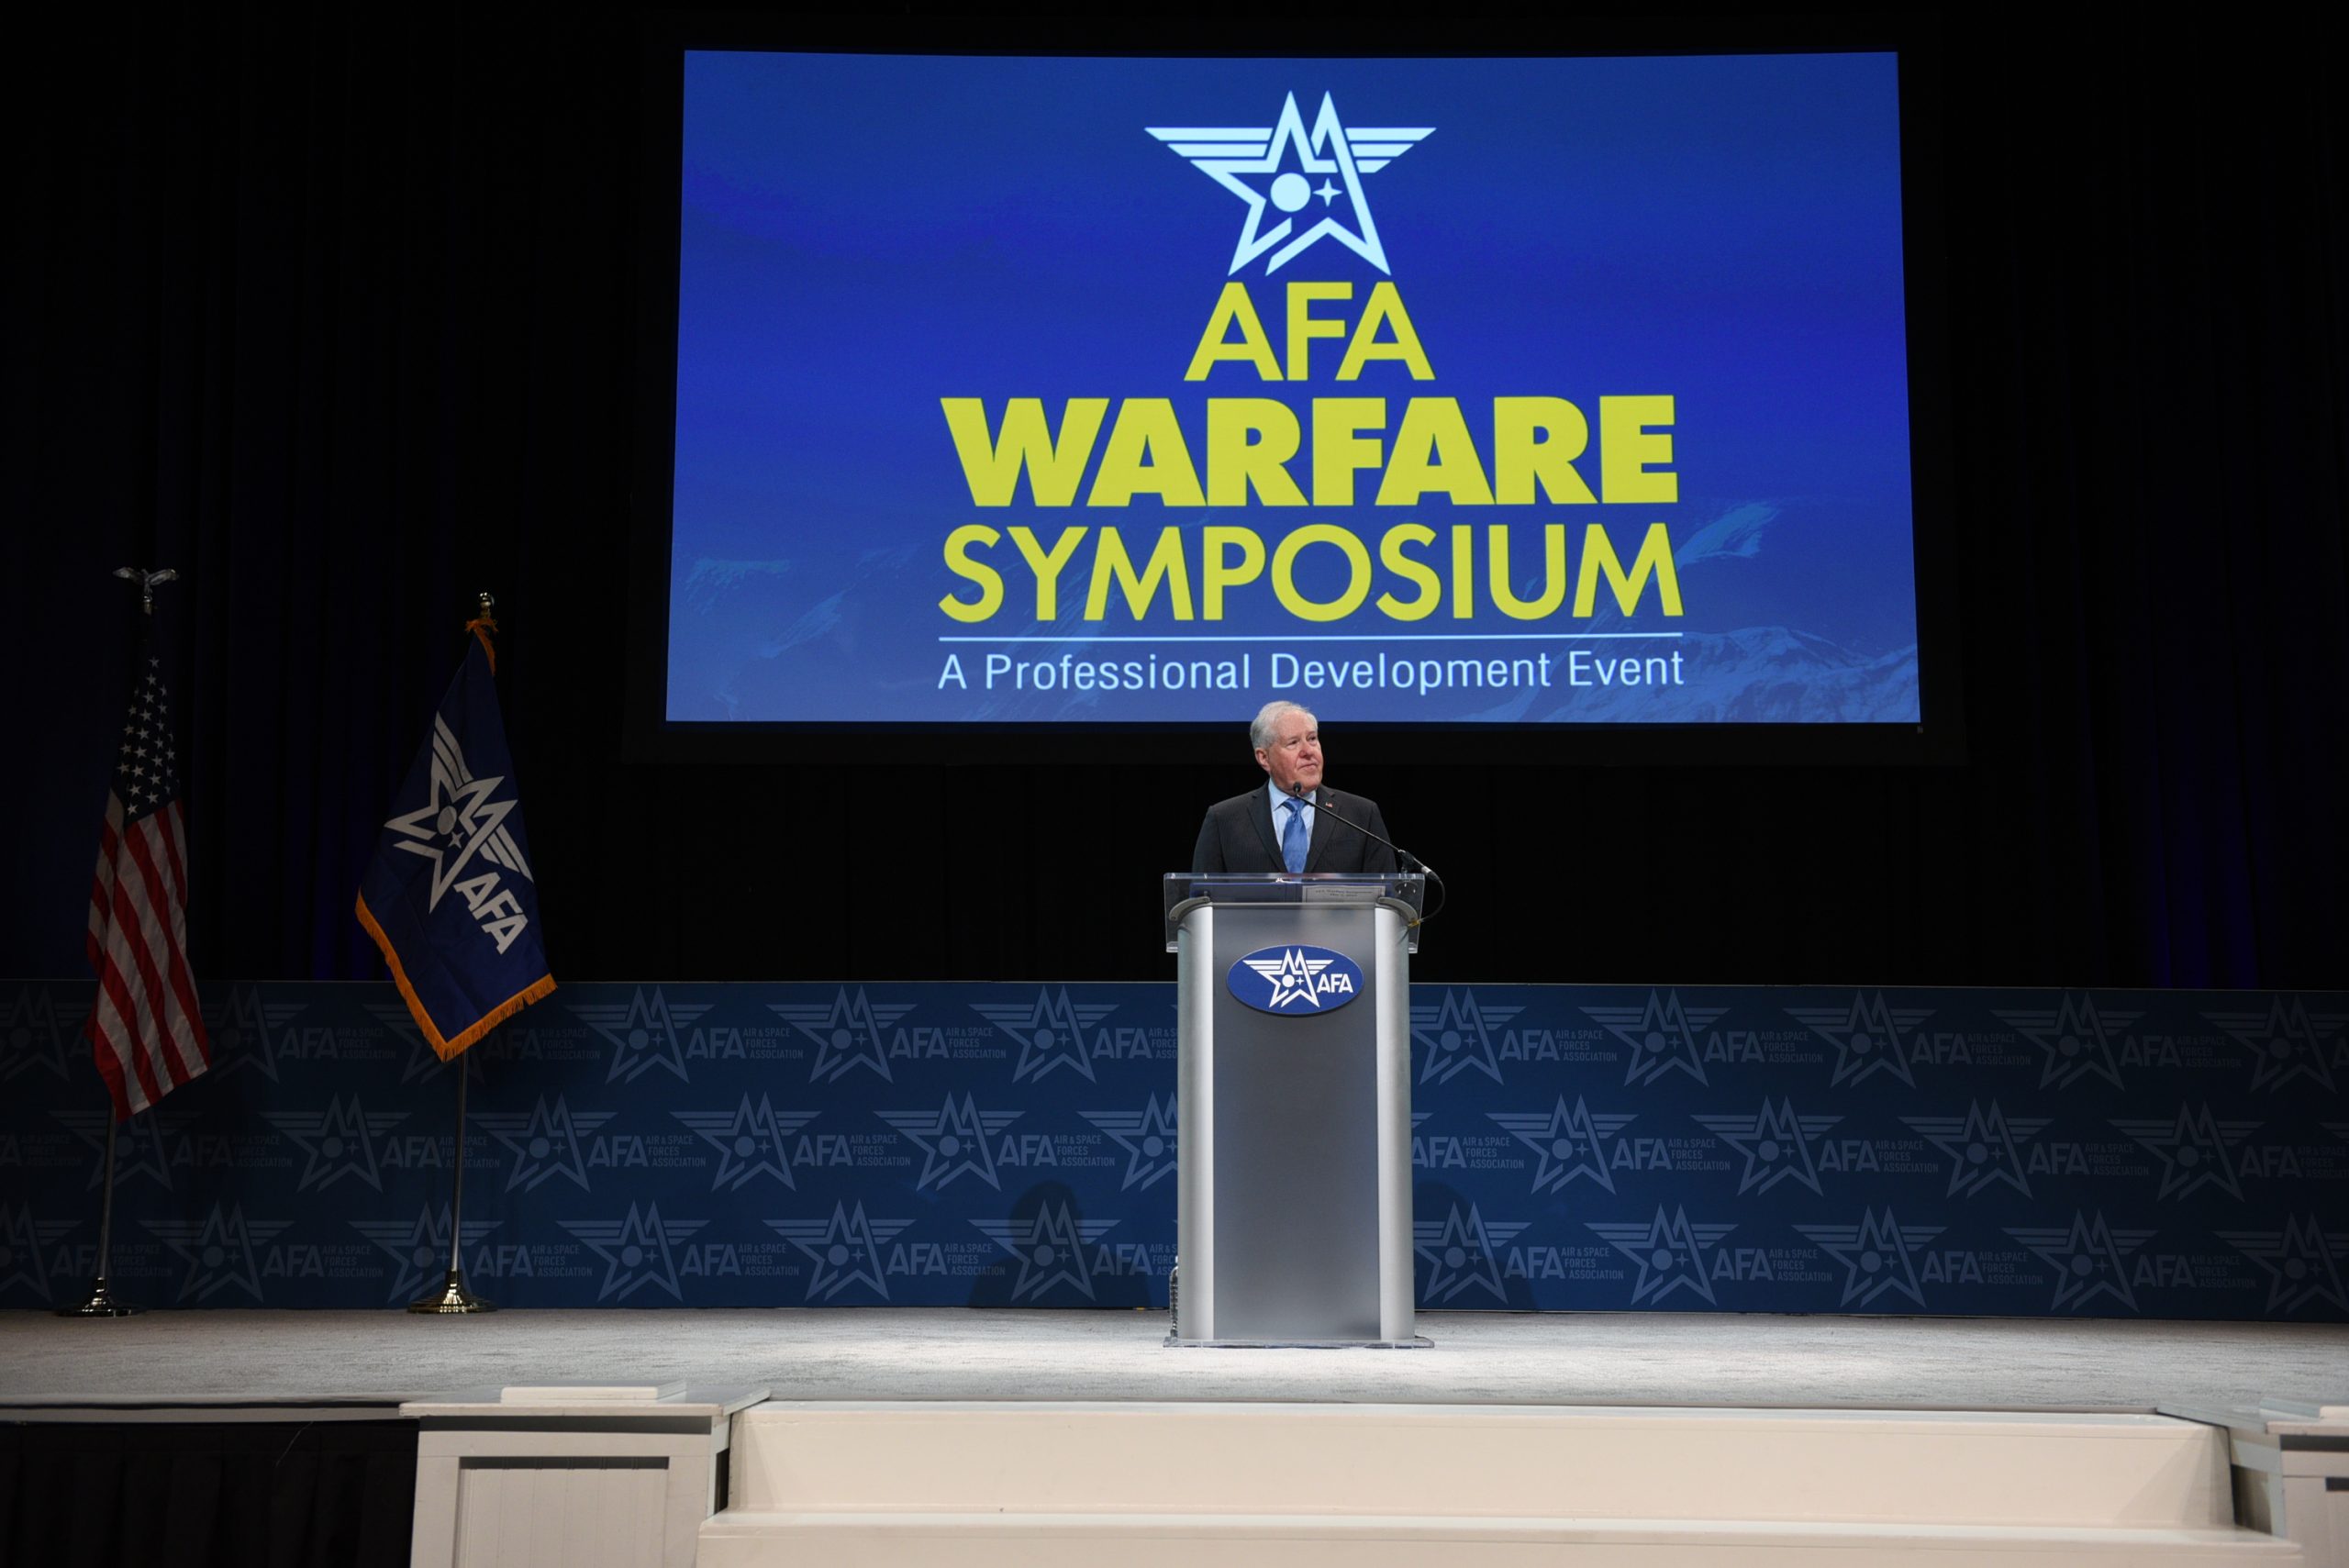 Big Changes In Store as Air Force, Space Force Arrive at AFA Warfare Symposium